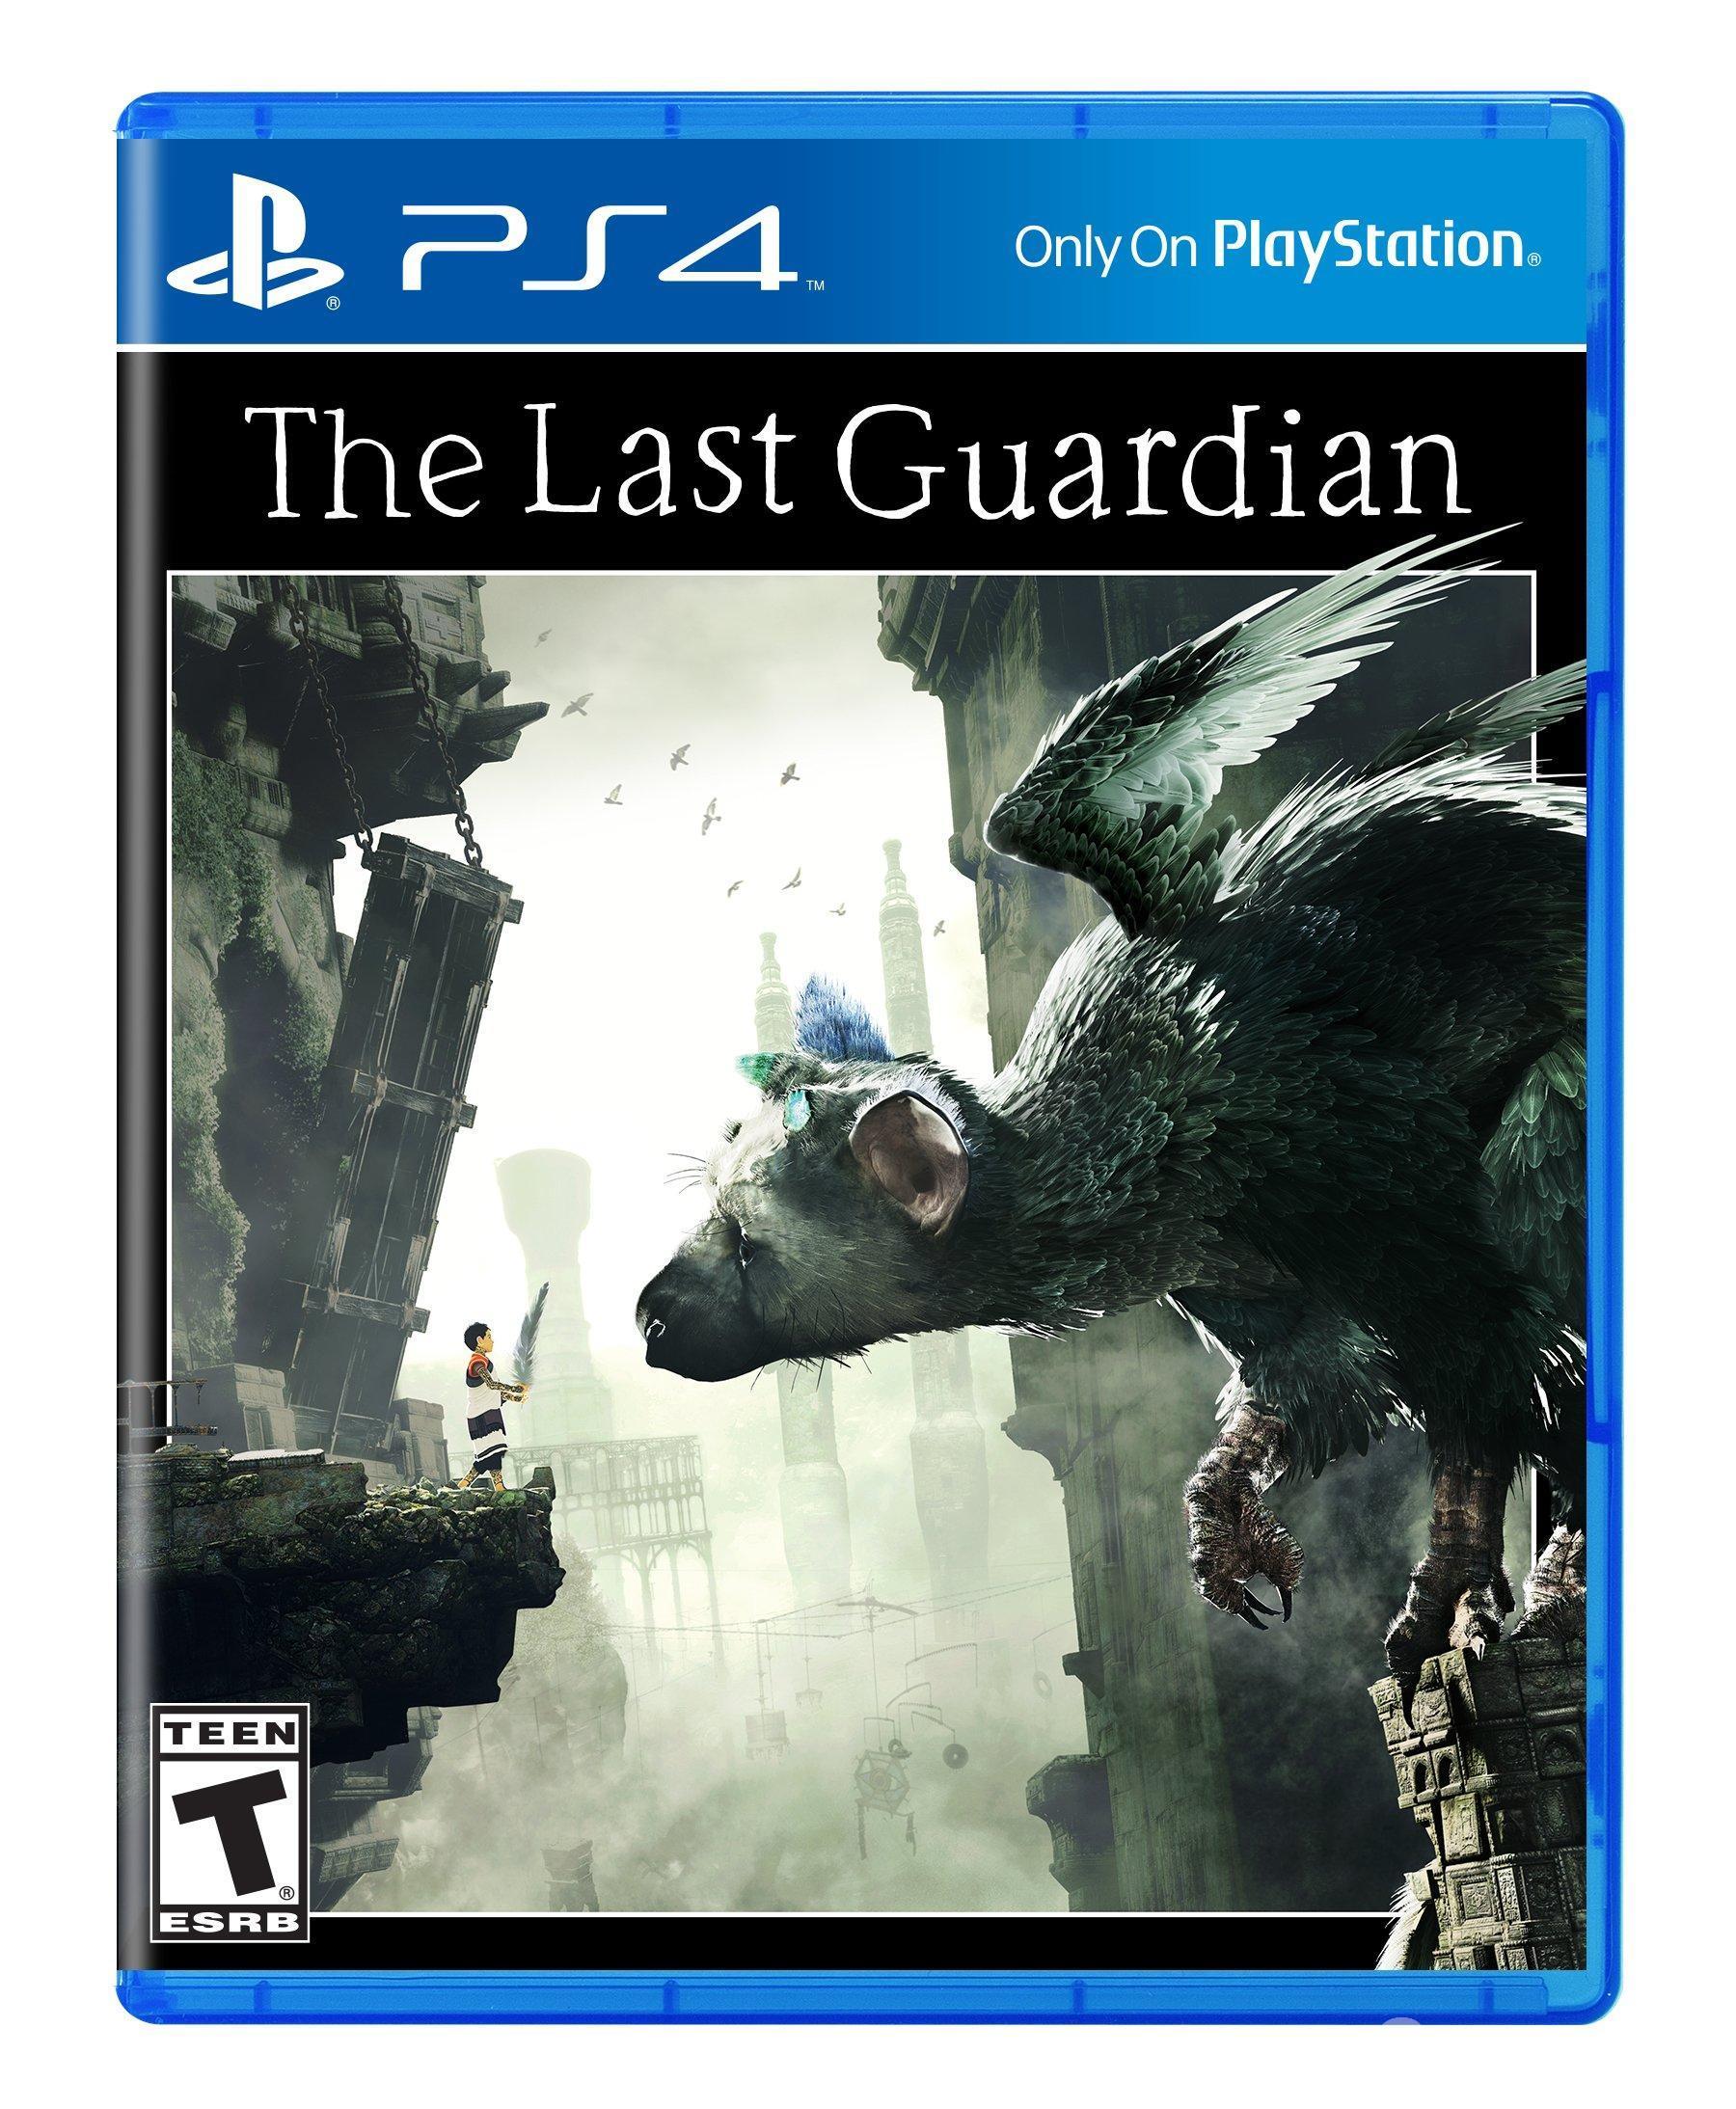 The Last Guardian - The game is based on a story of an older man who narrates his experience as a child